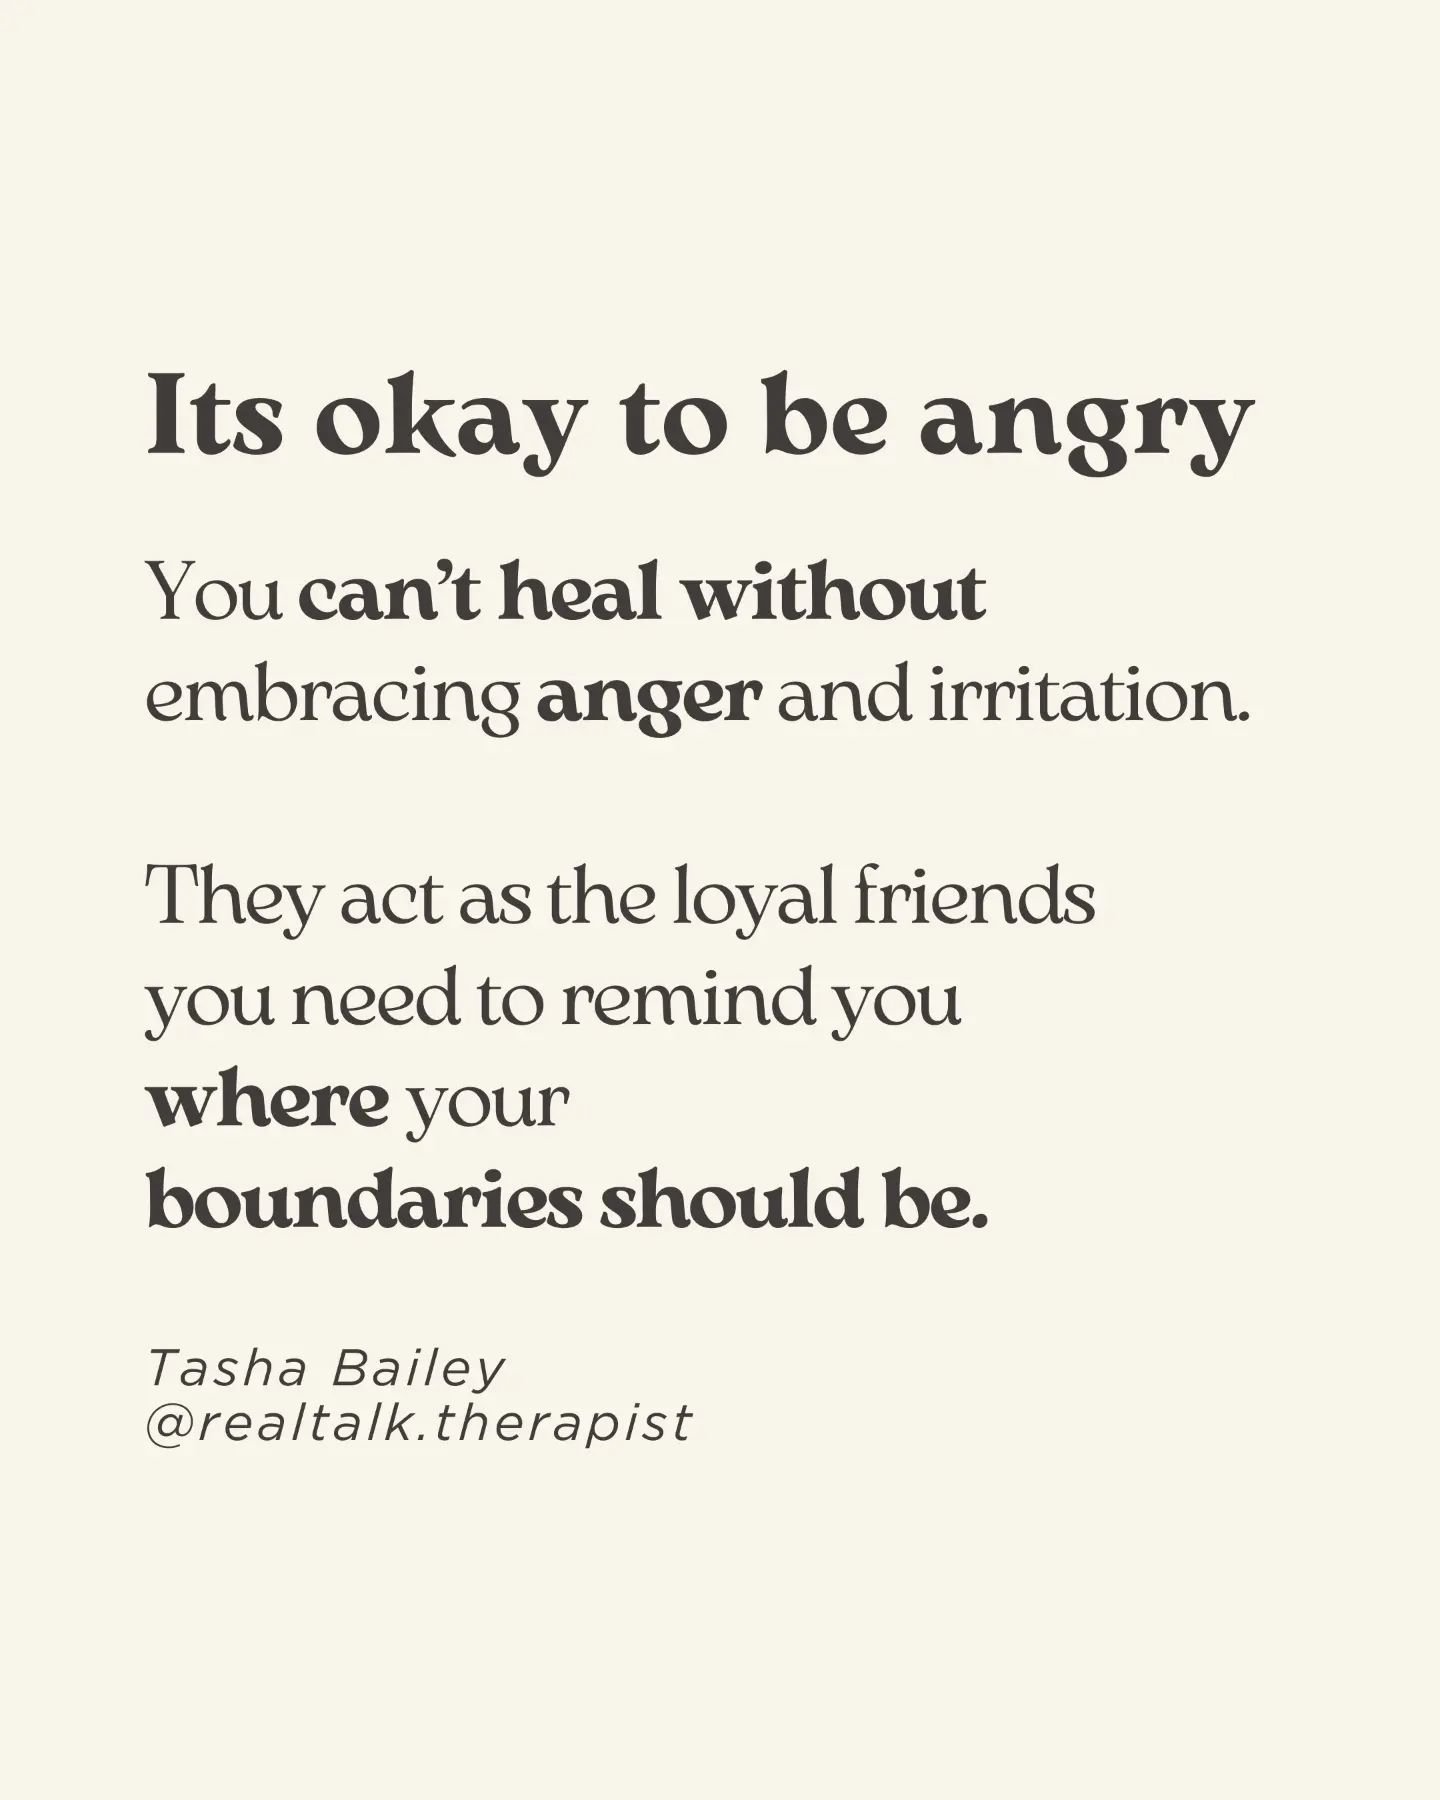 Too many of us were taught to believe that anger is harmful, toxic and needs to be suppressed to be socially acceptable. 

But it doesn't have to be. We can learn from anger...

- Irritation happens when something doesn't feel right. It's tapping on 